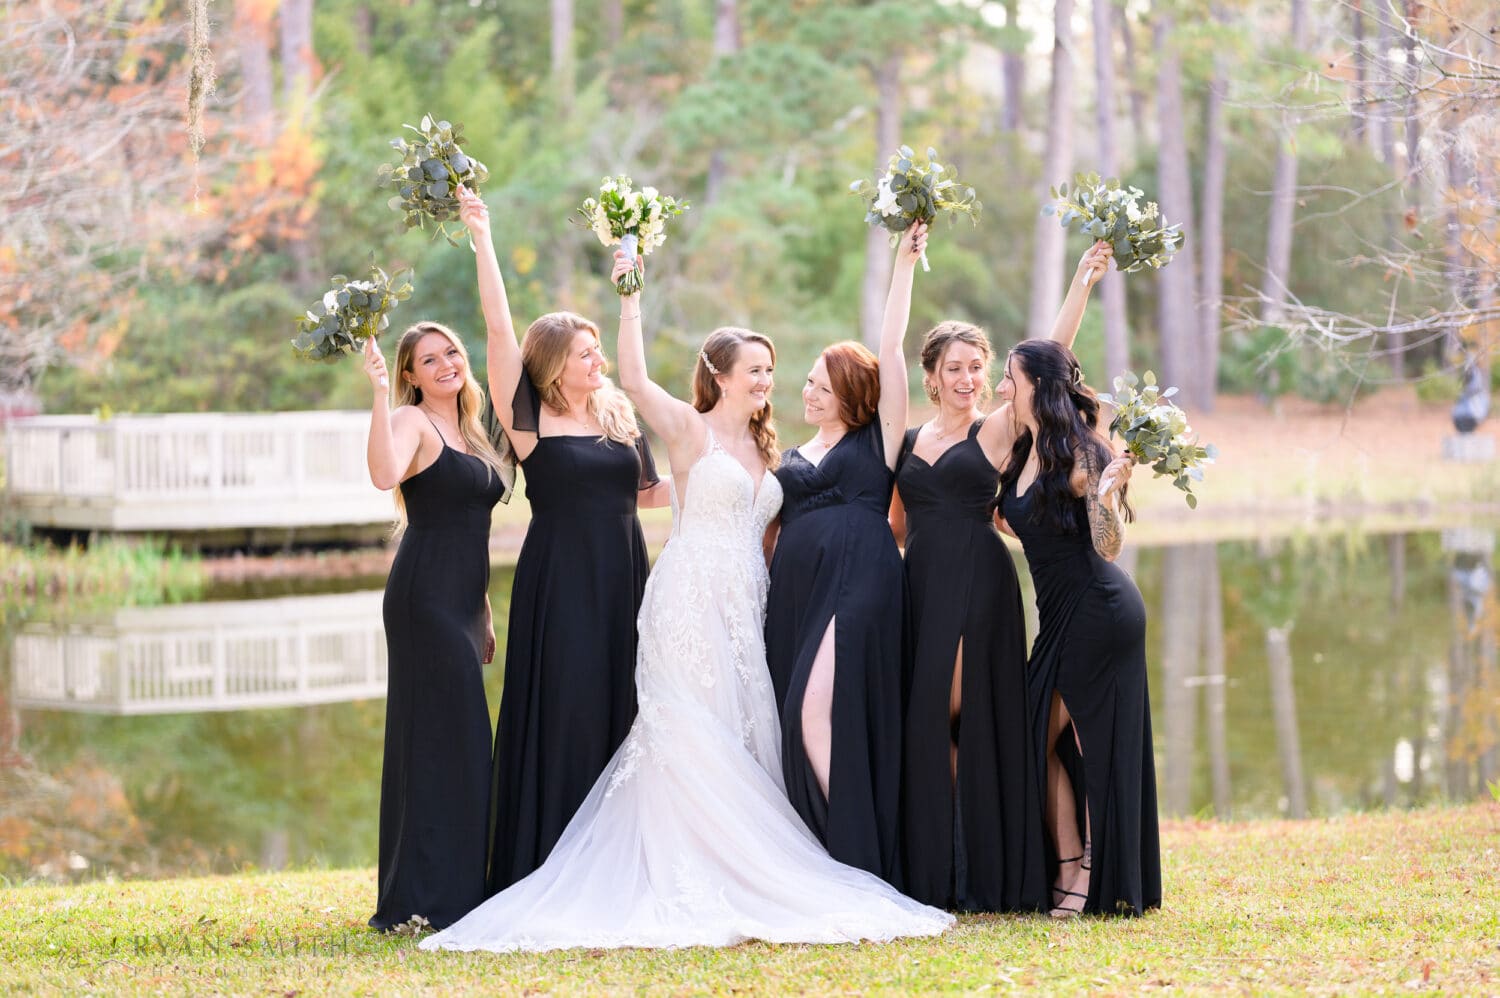 Bridesmaids cheering and holding flowers in the air - Brookgreen Gardens